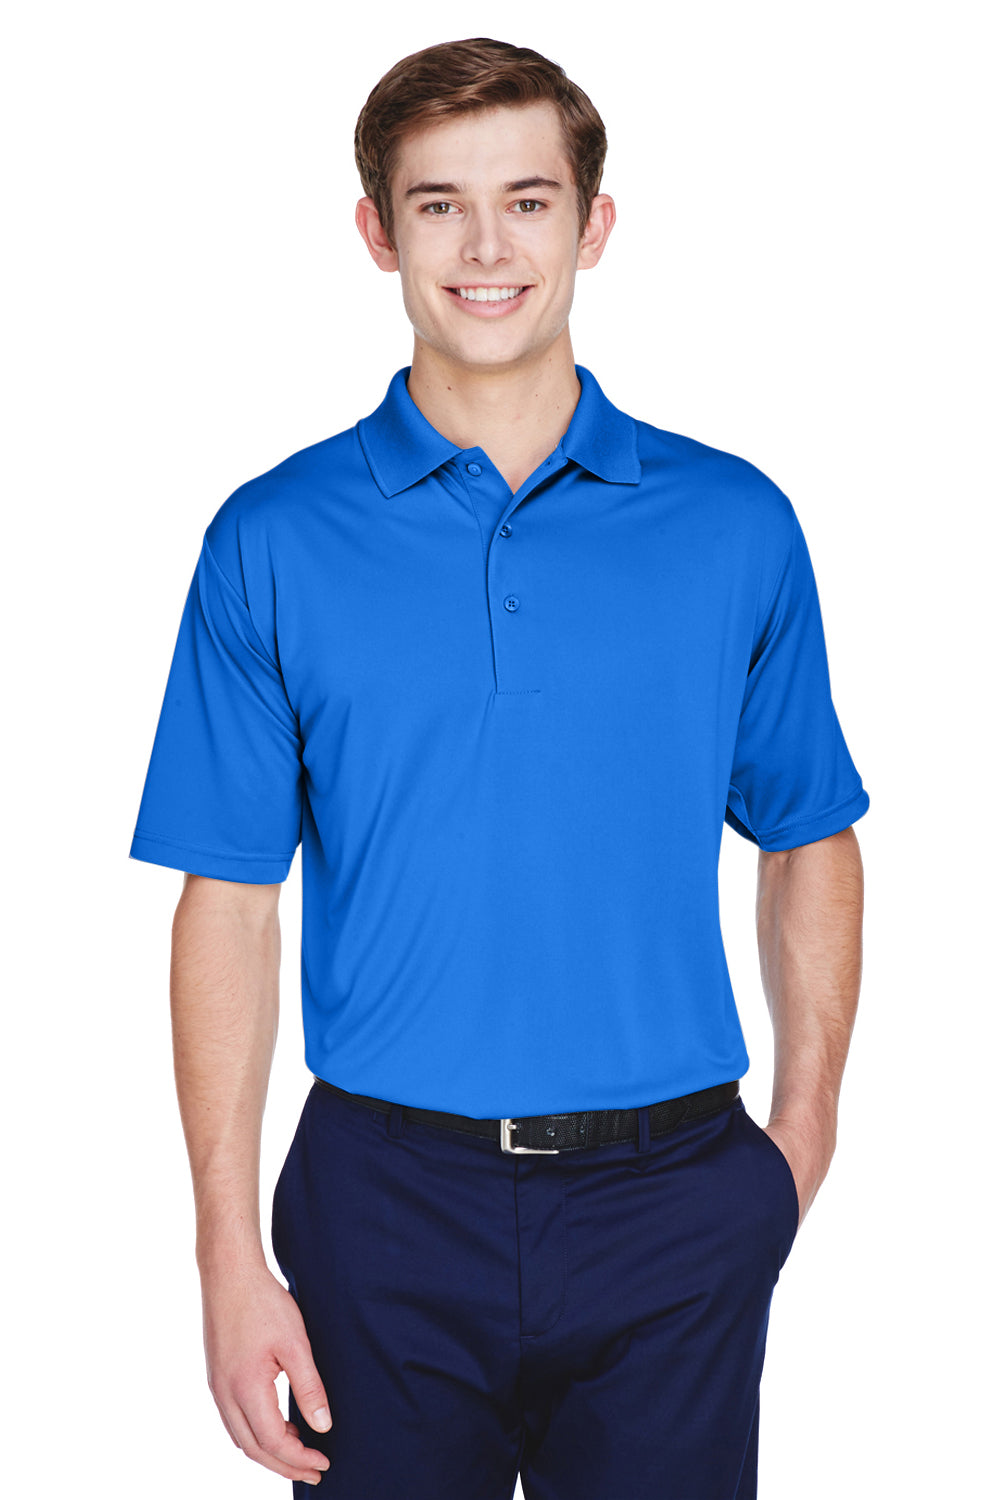 UltraClub 8610 Mens Cool & Dry 8 Star Elite Performance Moisture Wicking Short Sleeve Polo Shirt Royal Blue Front